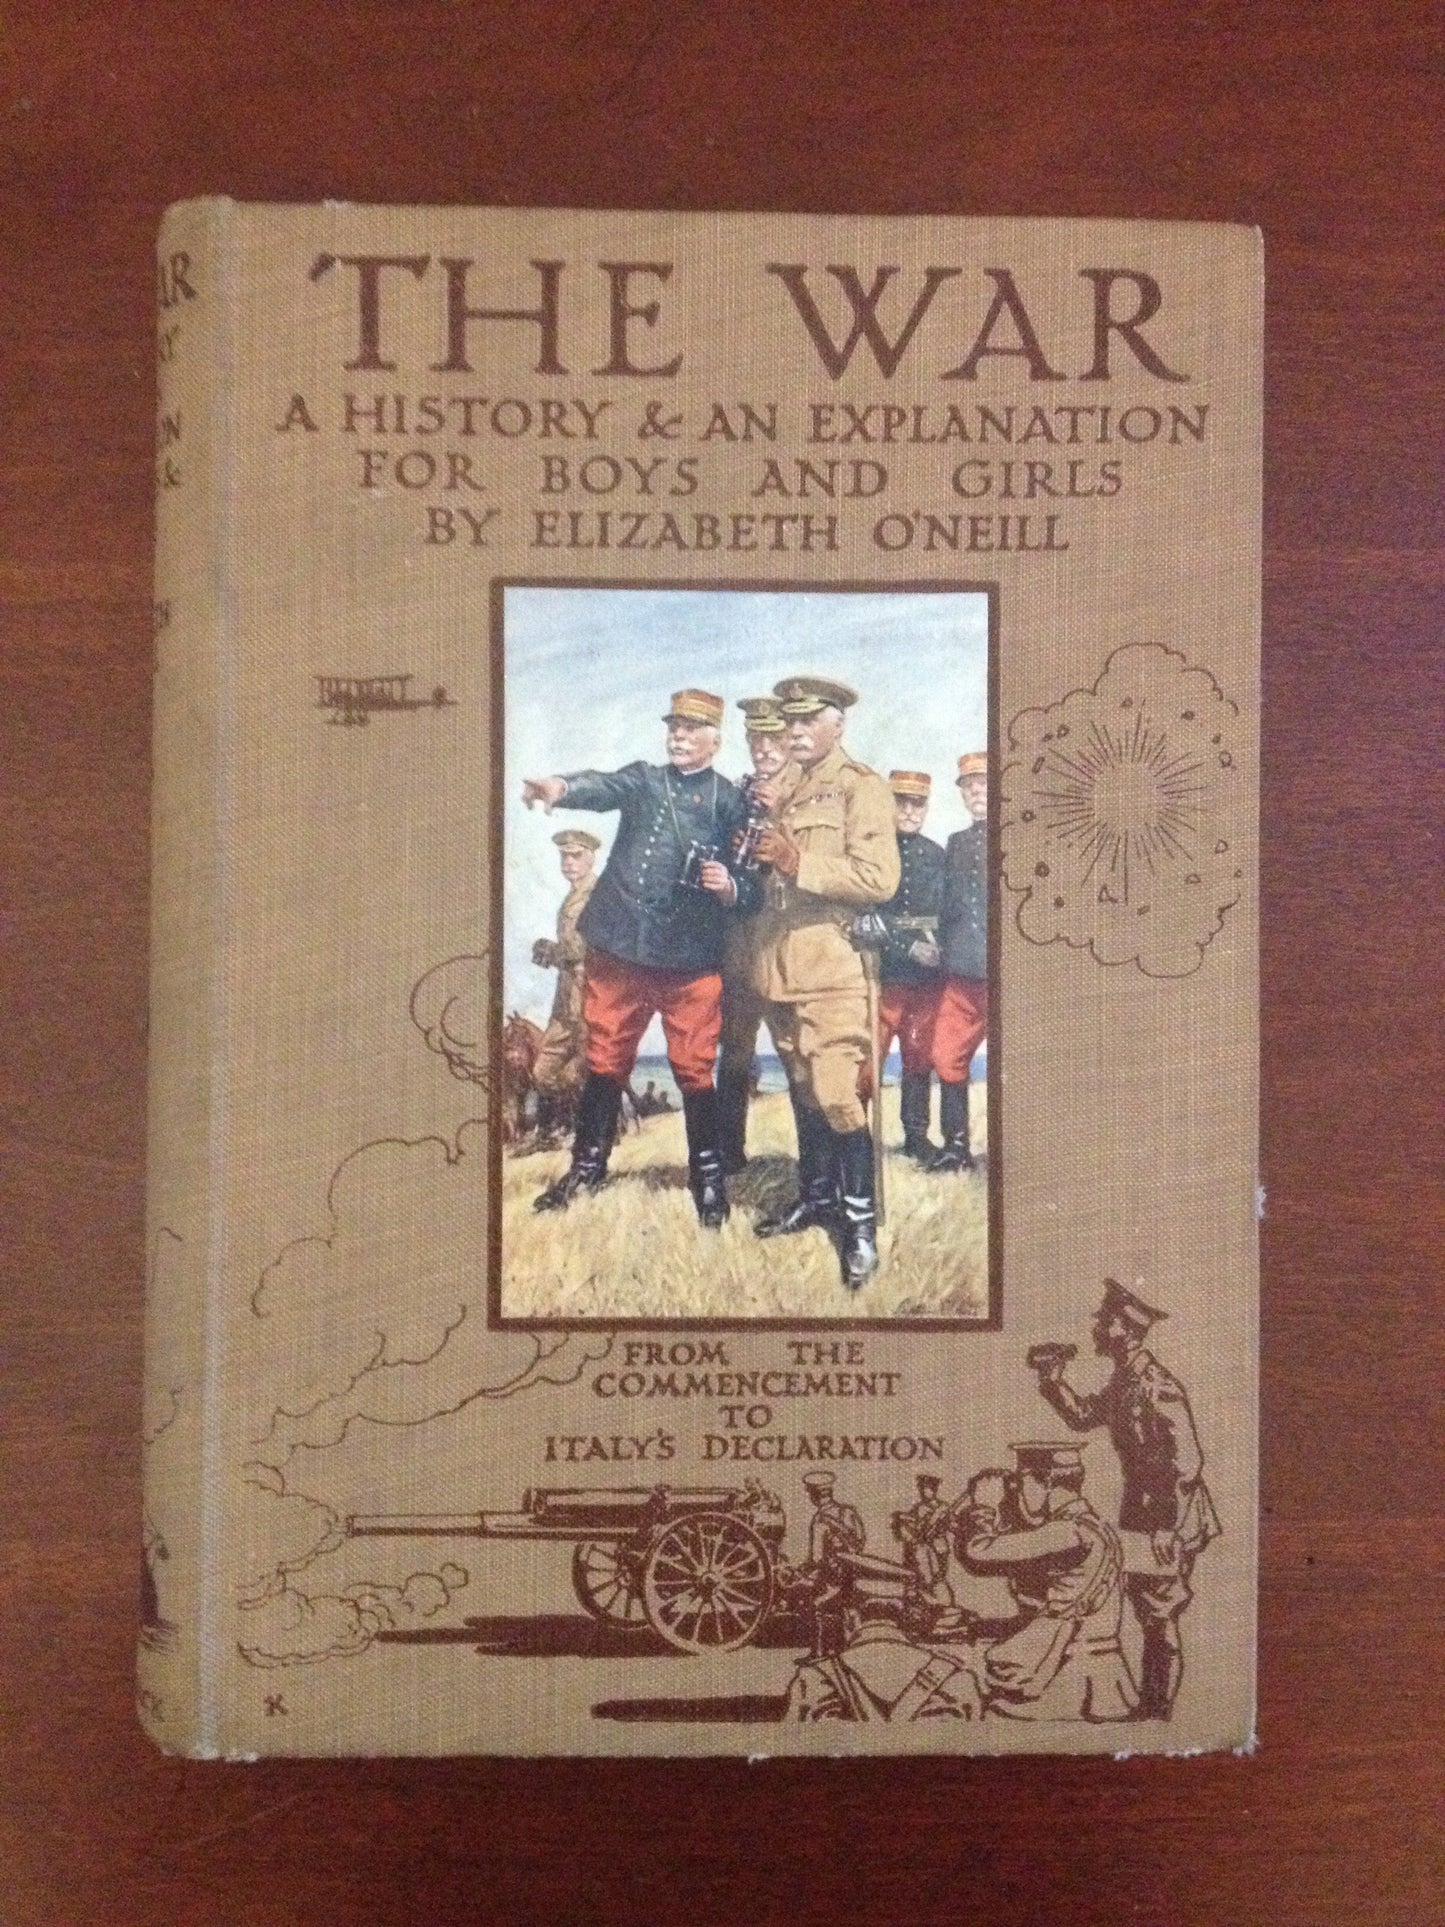 THE WAR - A HISTORY & AN EXPLANATION FOR BOYS AND GIRLS  BY: ELIZABETH O'NEILL BooksCardsNBikes